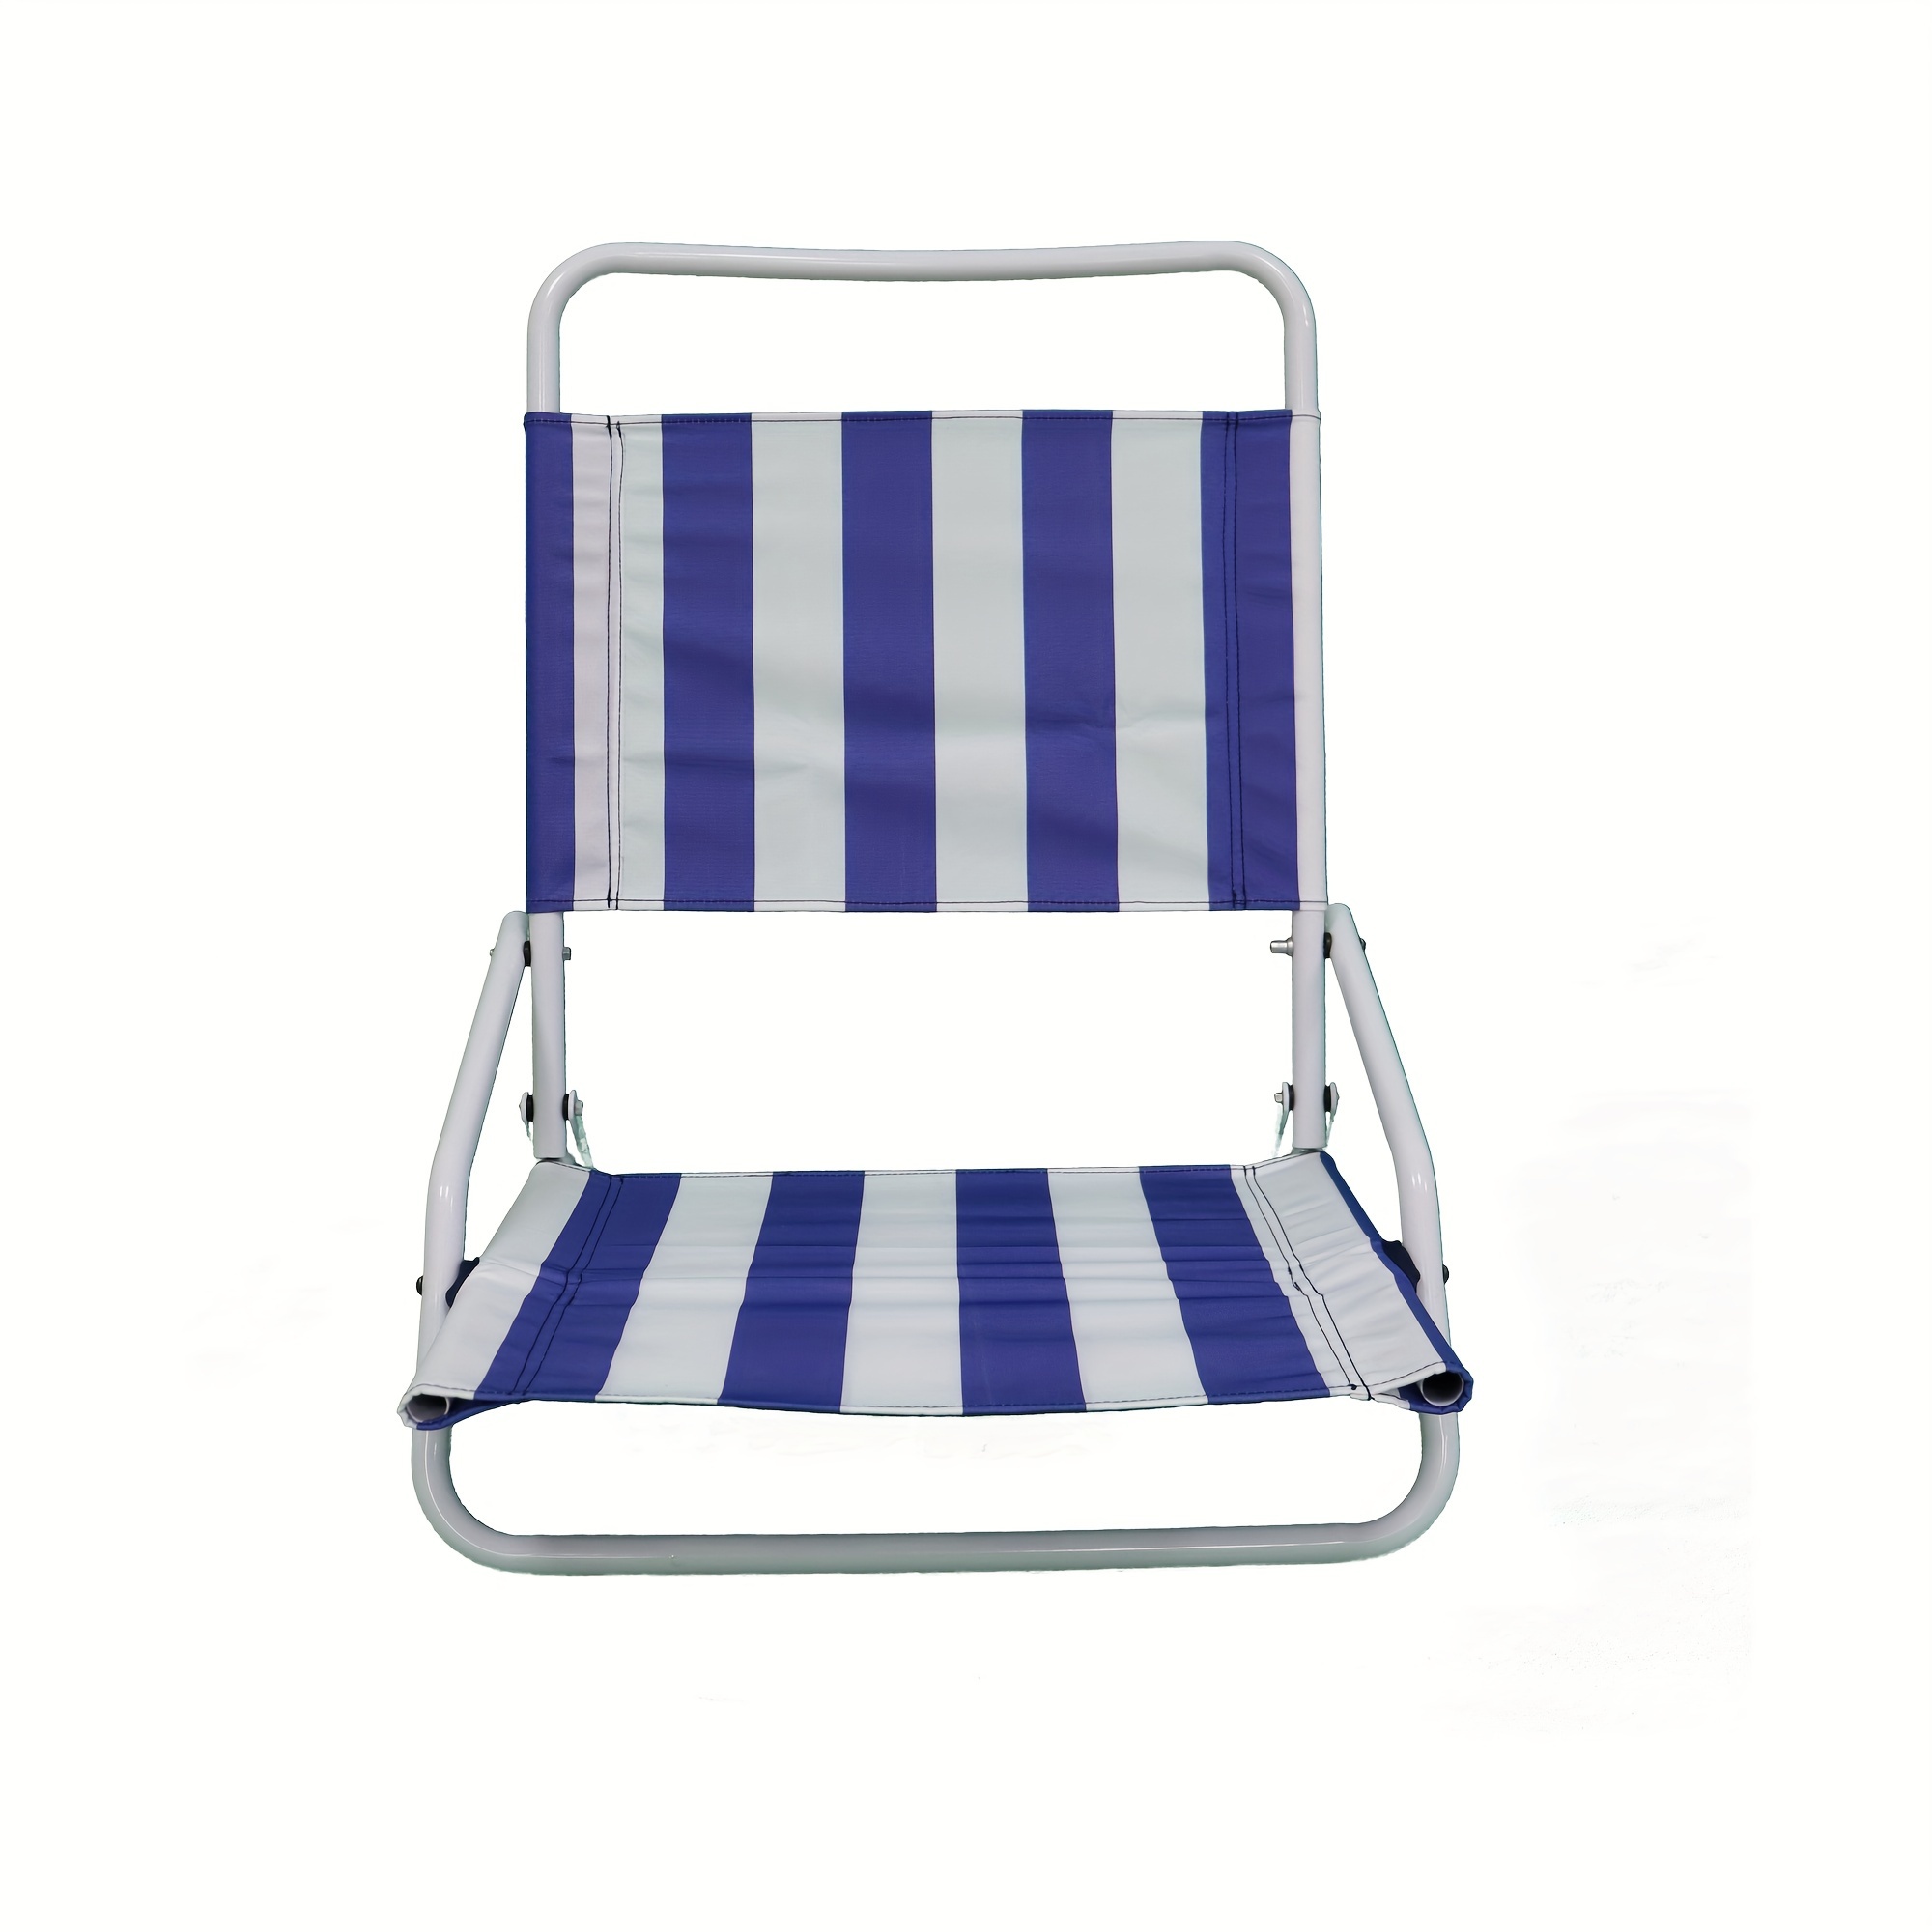 

1 Piece Of Low Beach Chair, Suitable For Summer Relaxation/beach Vacation/seaside Surfing/sunbathing, Foldable And Easy To Carry